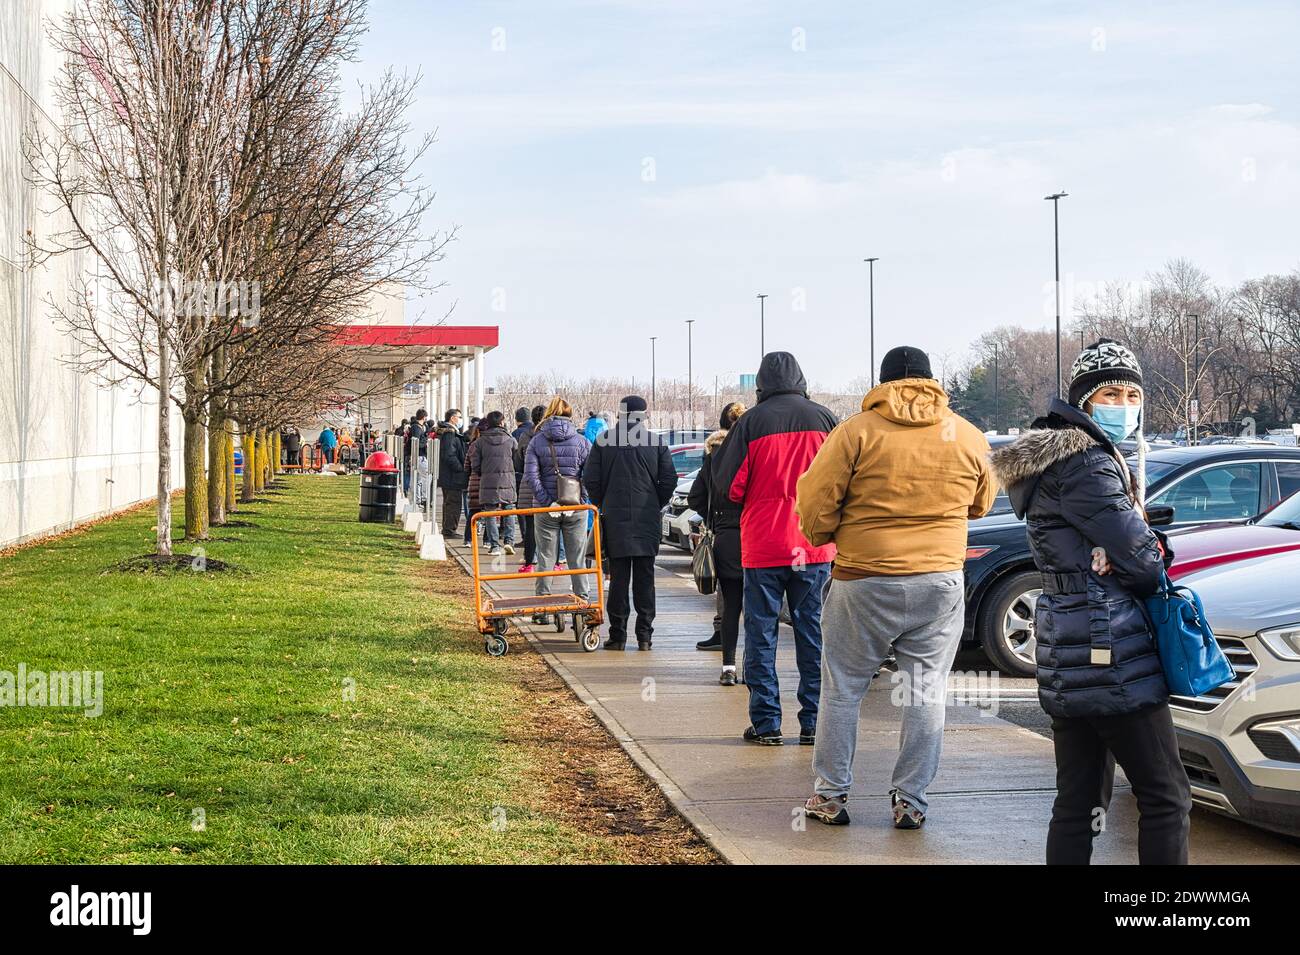 Social distancing on a Costco line-up during the Covid-19 pandemic, Toronto, Canada Stock Photo